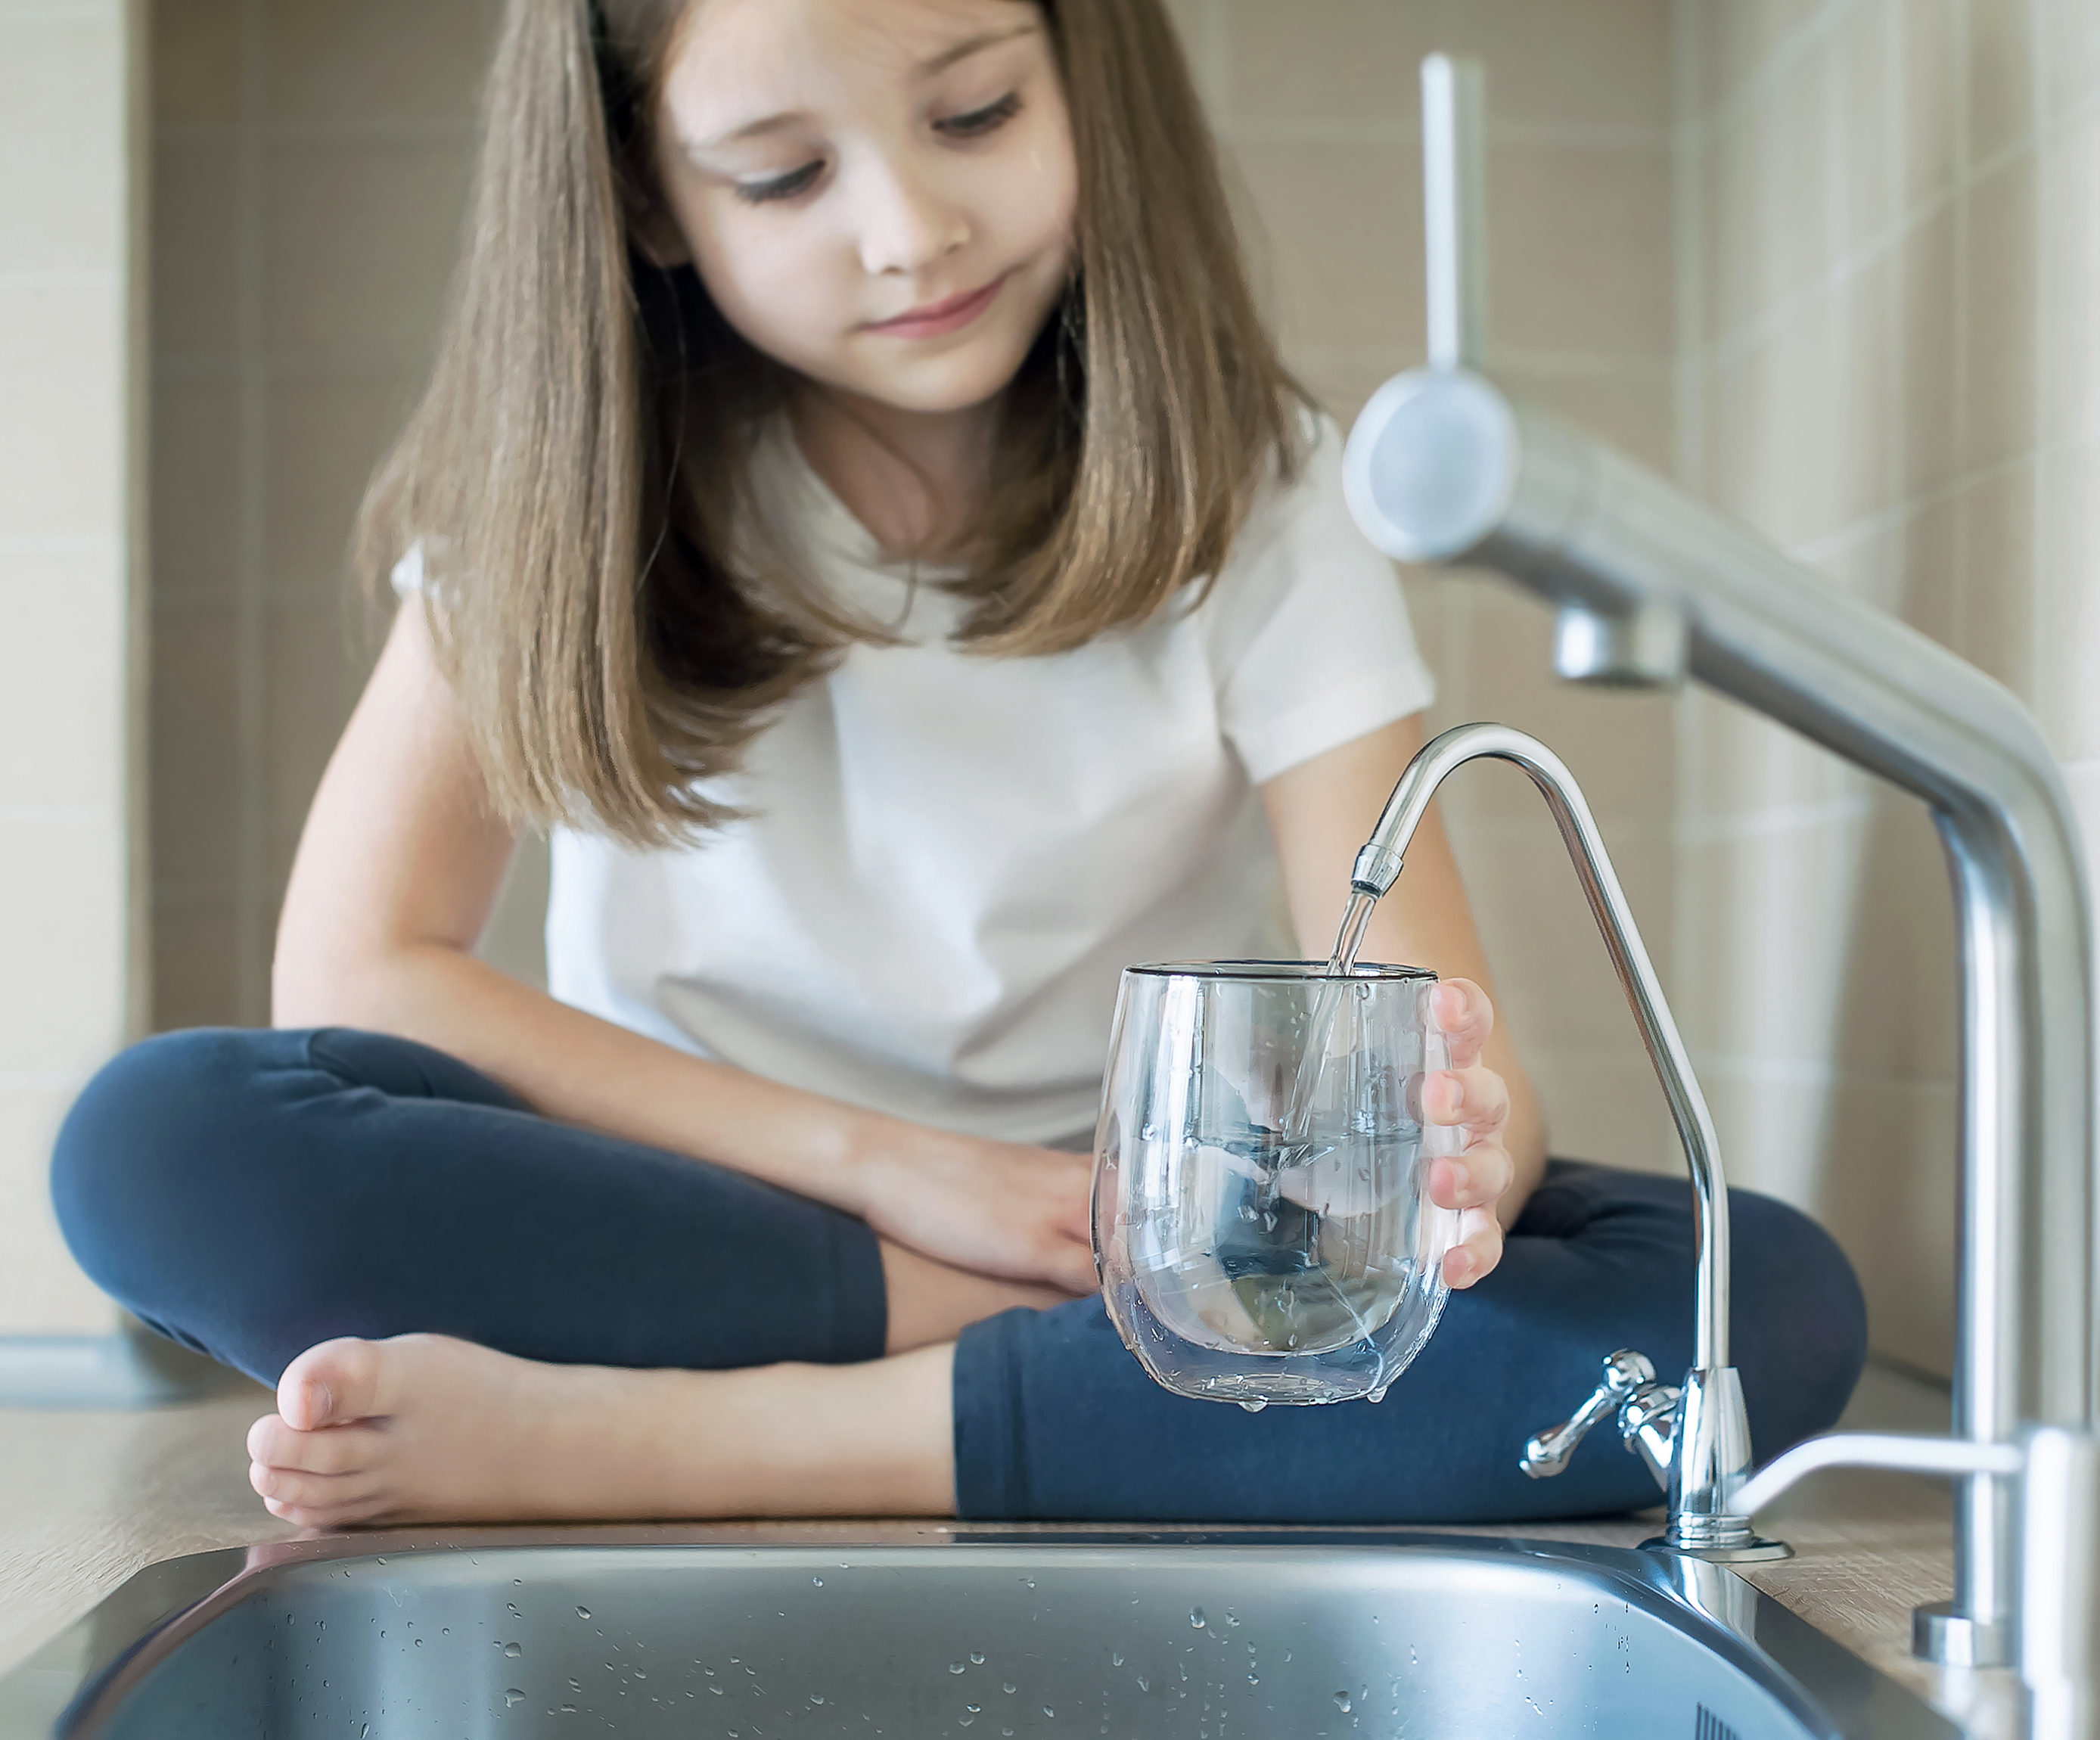 Young girl sitting on the counter filling up a glass of water